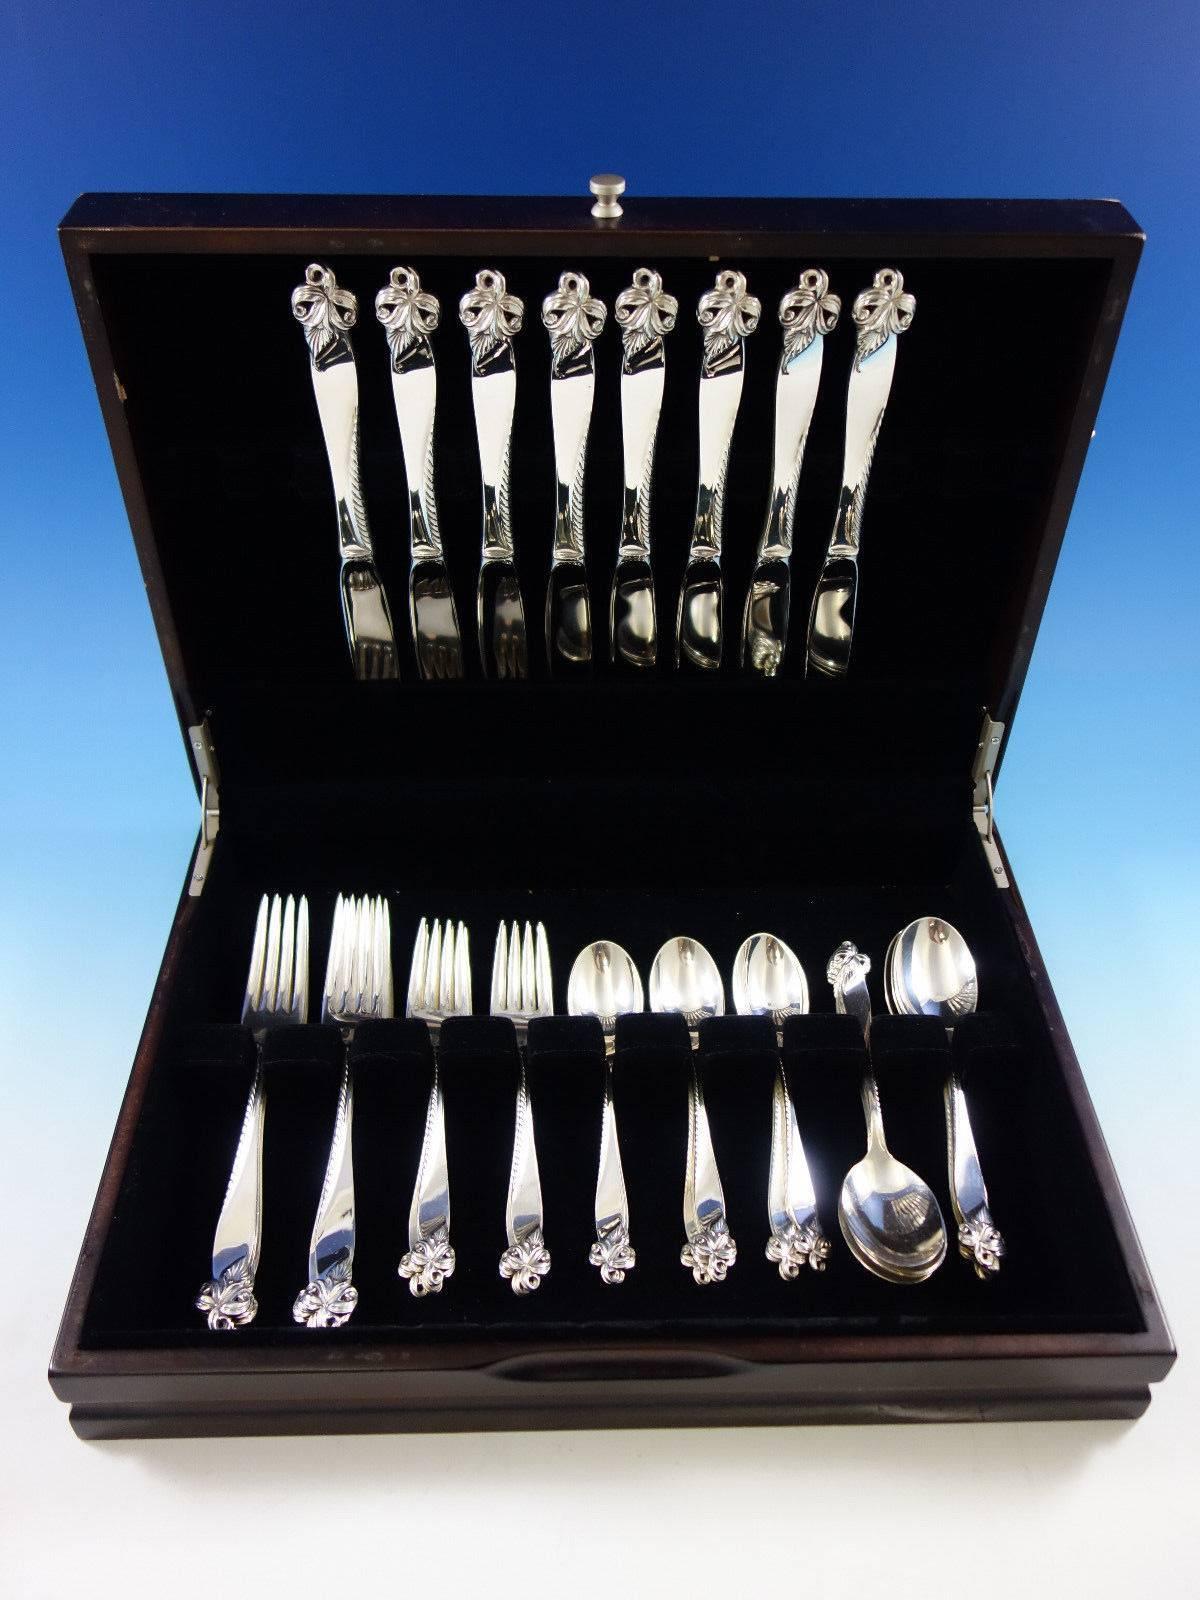 Dinner size Orchid Elegance by Wallace sterling silver flatware set of 40 pieces. This set includes: 

Eight dinner size knives, 9 3/4